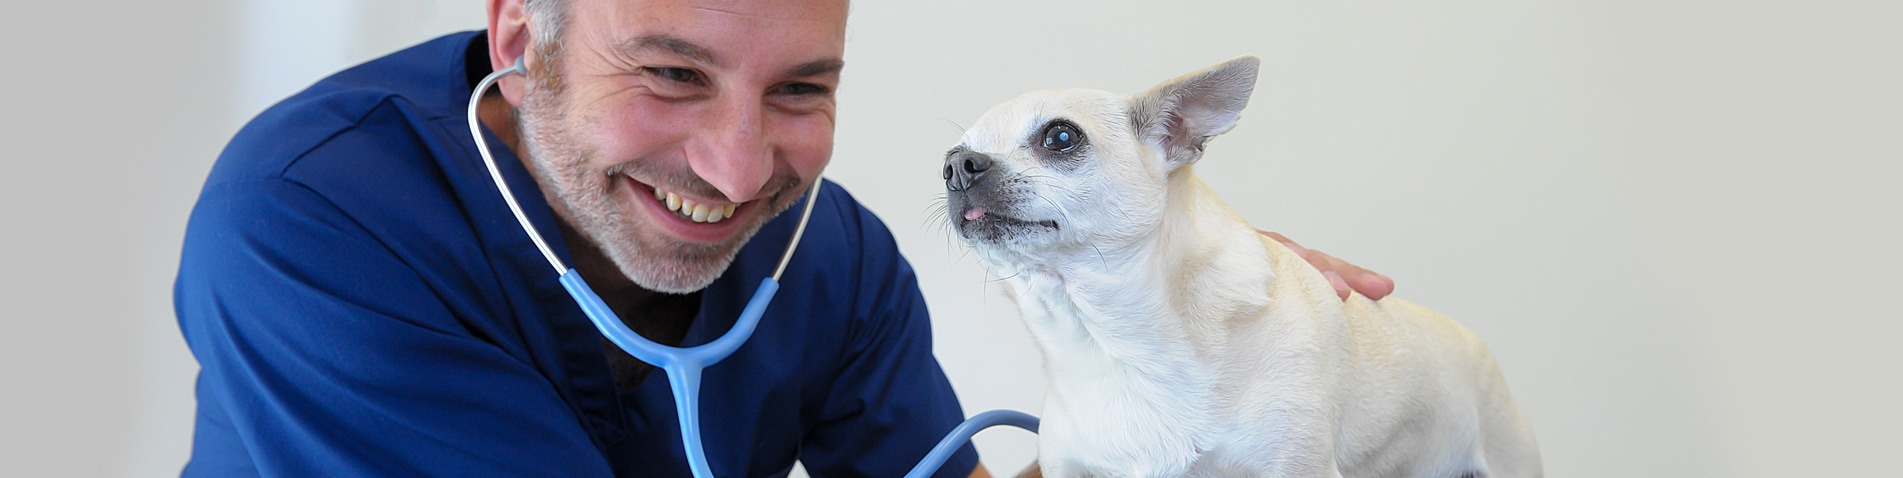 Veterinary Services | Gower Vets Swansea